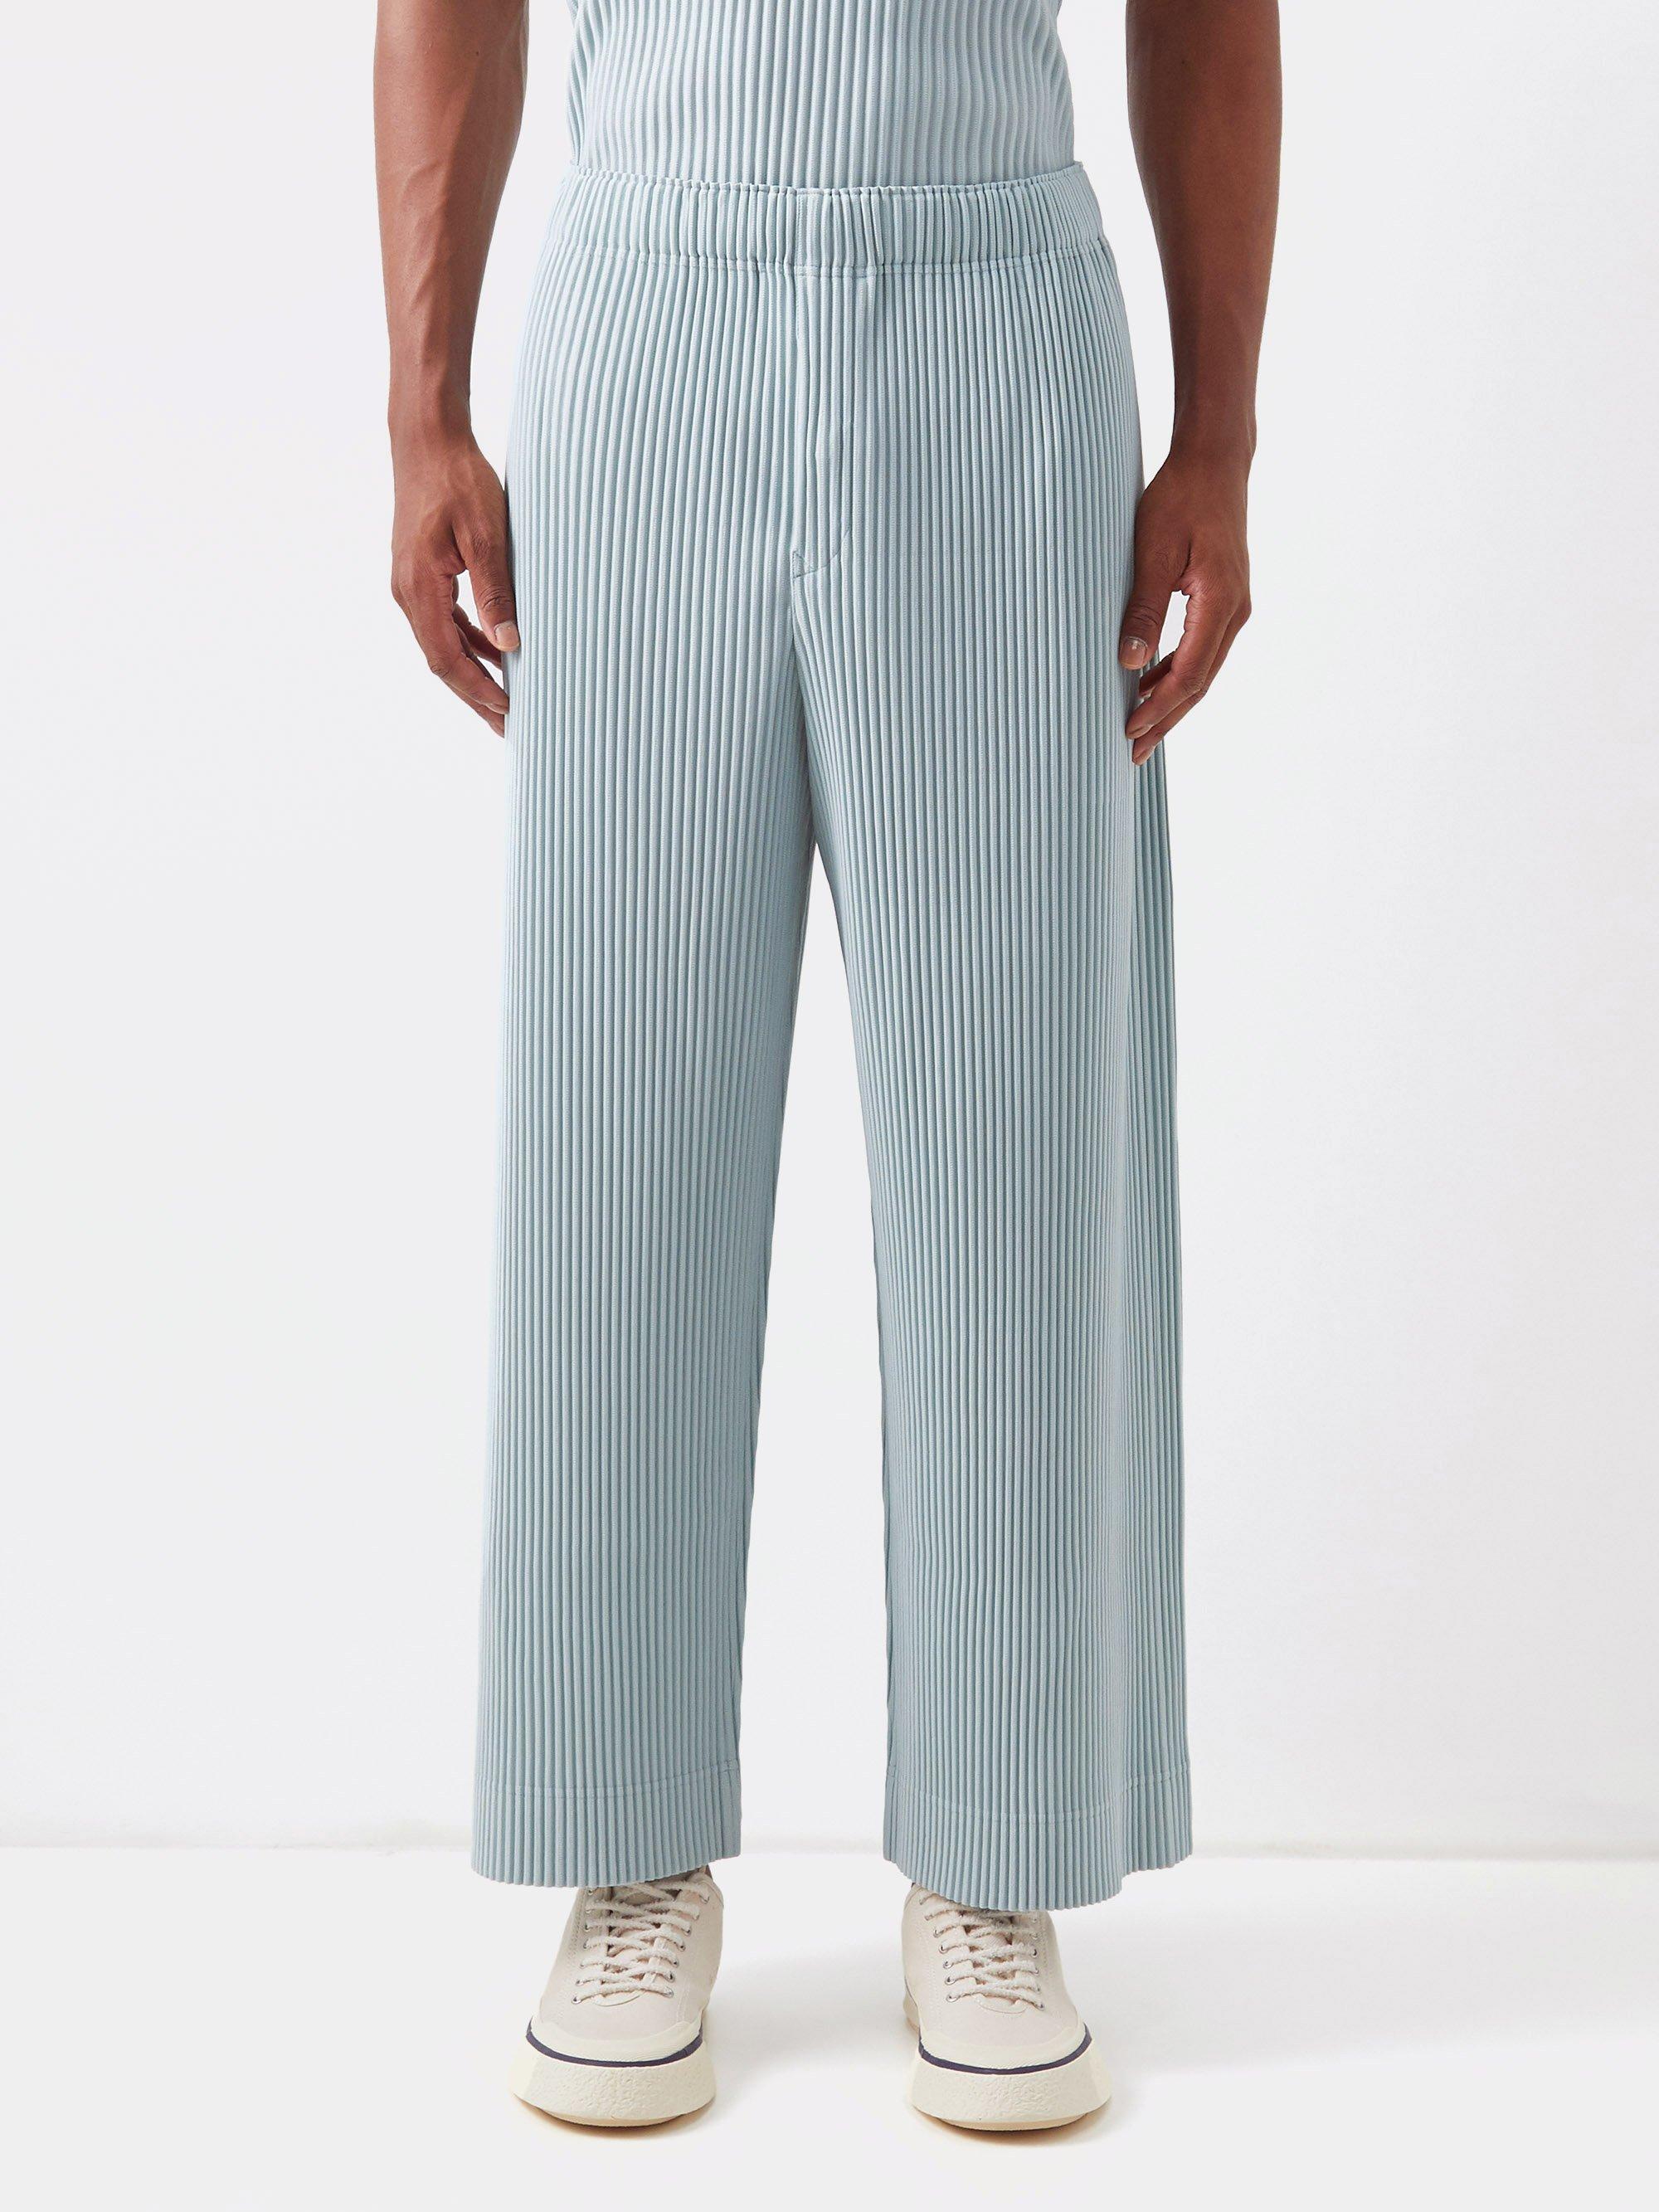 Buy HOMME PLISSÉ ISSEY MIYAKE Trousers online  Men  238 products   FASHIOLAin